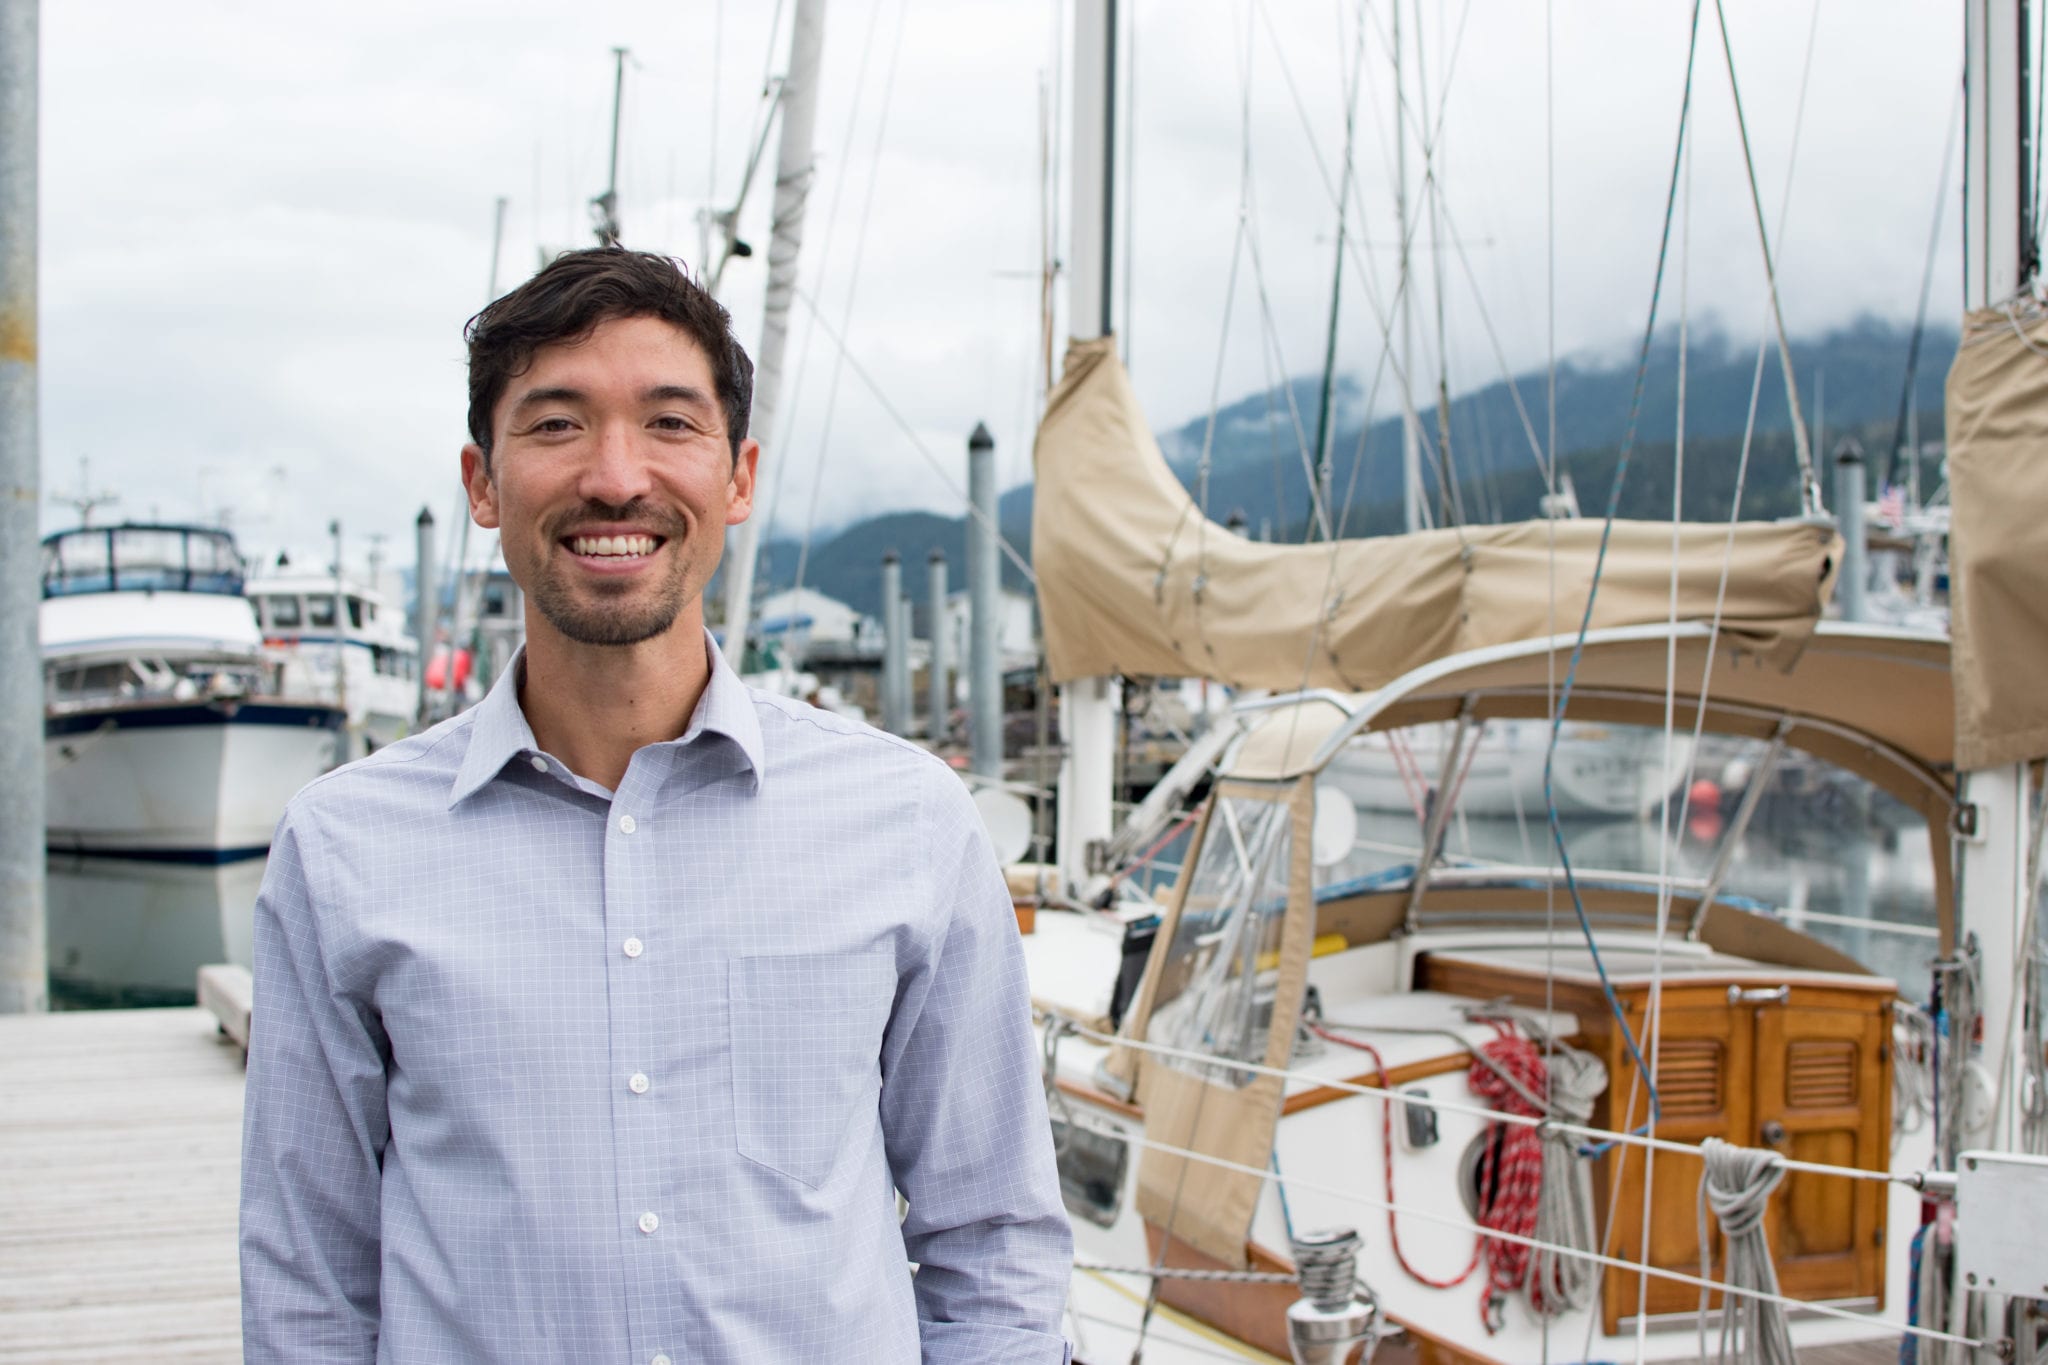 Greg Smith will become Juneau's first openly LGBTQ Assembly Member